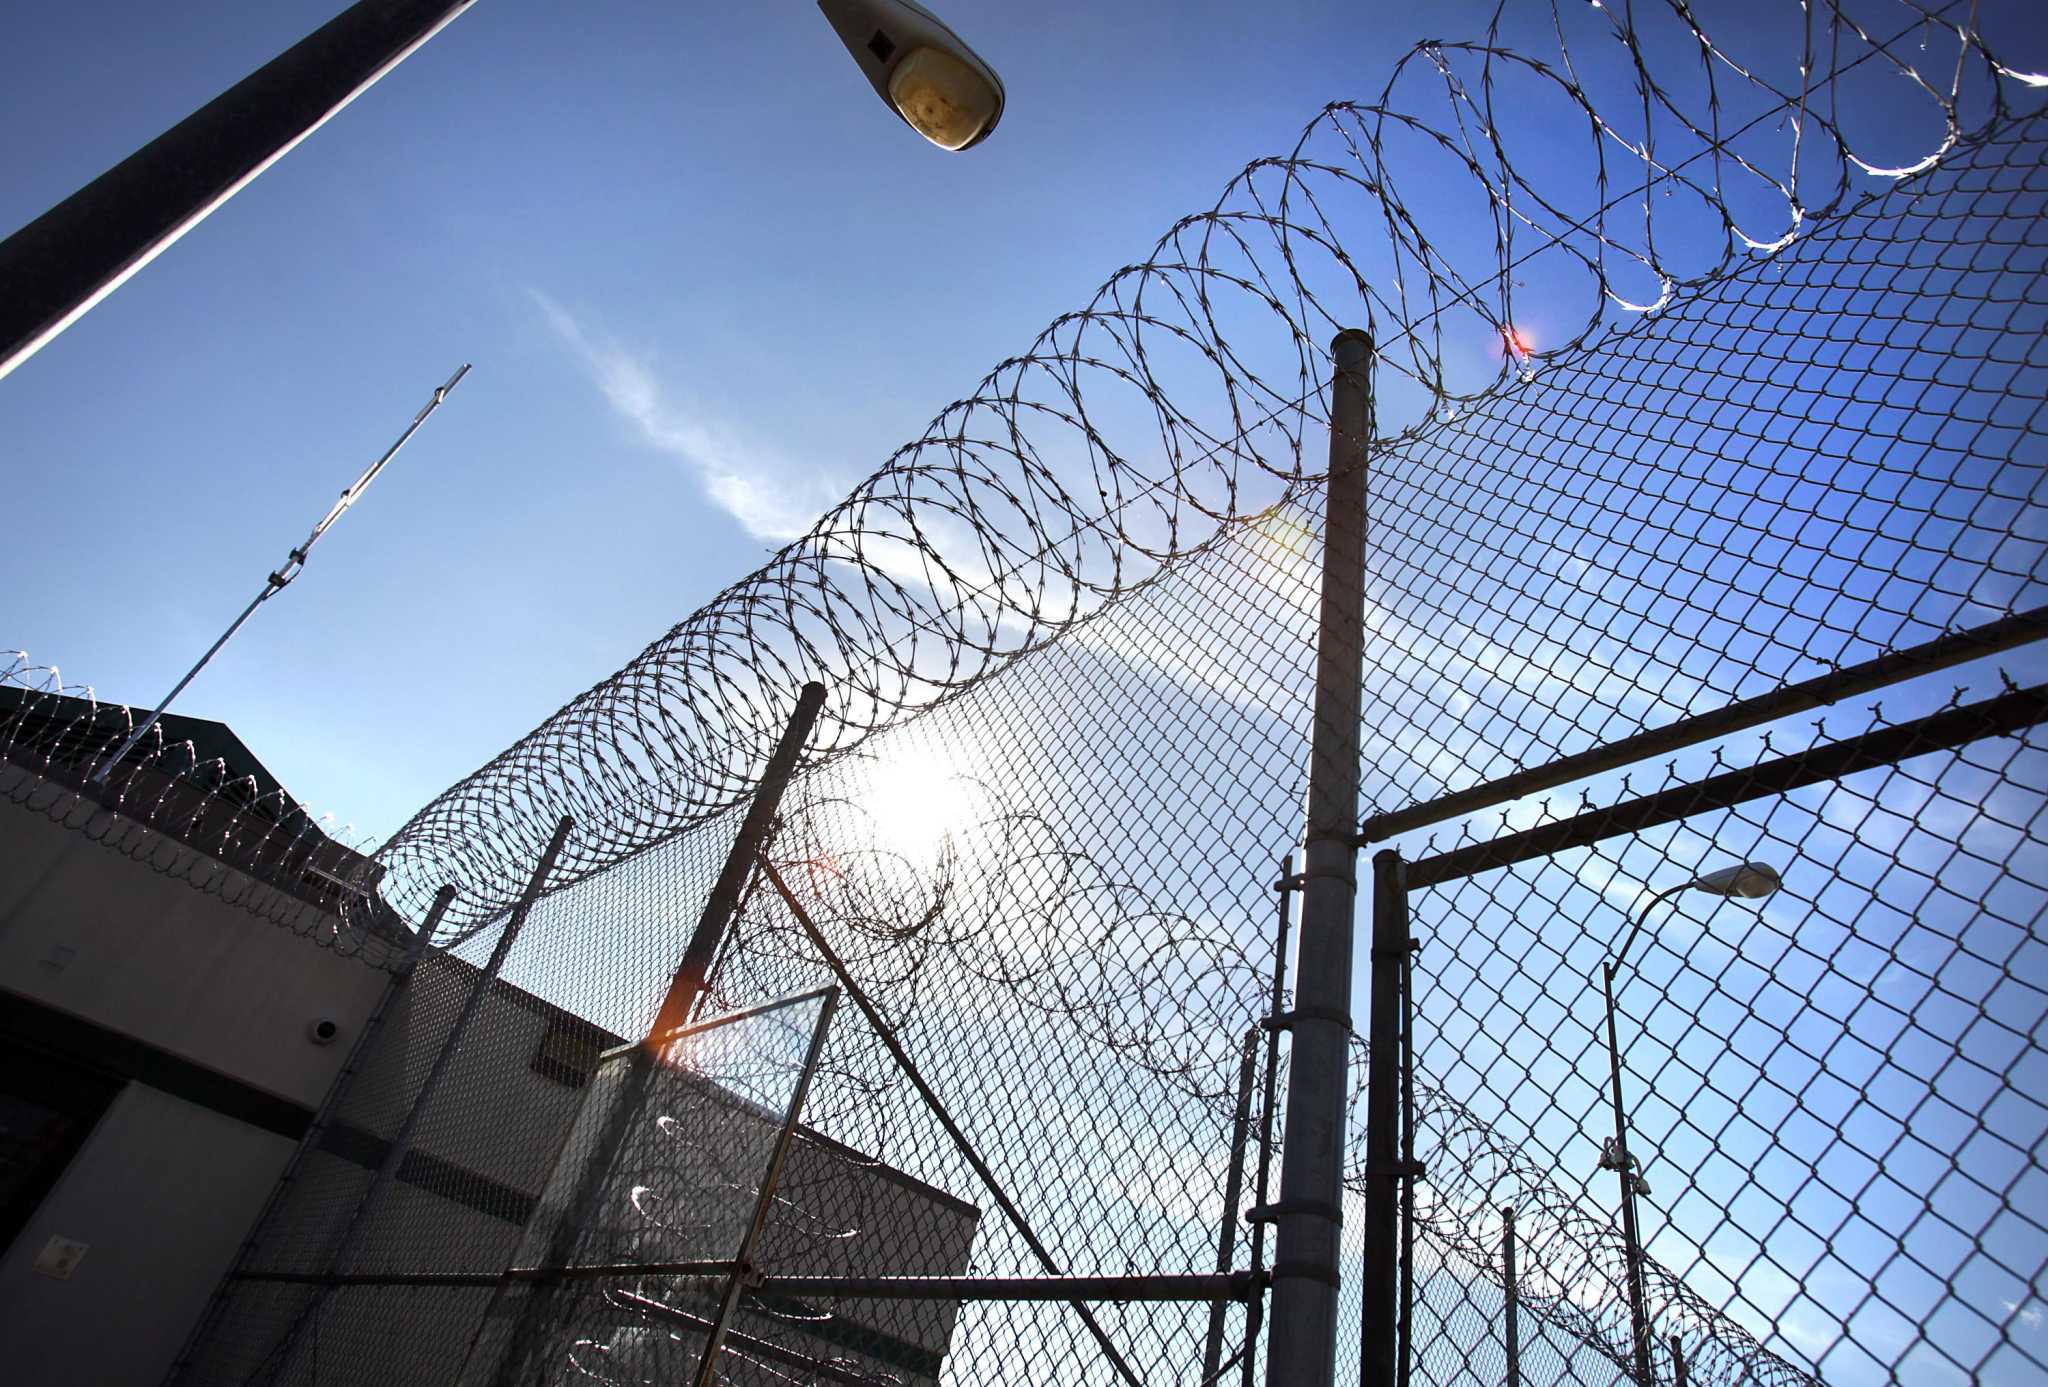 Three Texas prison units on complete lockdown related to possible COVID